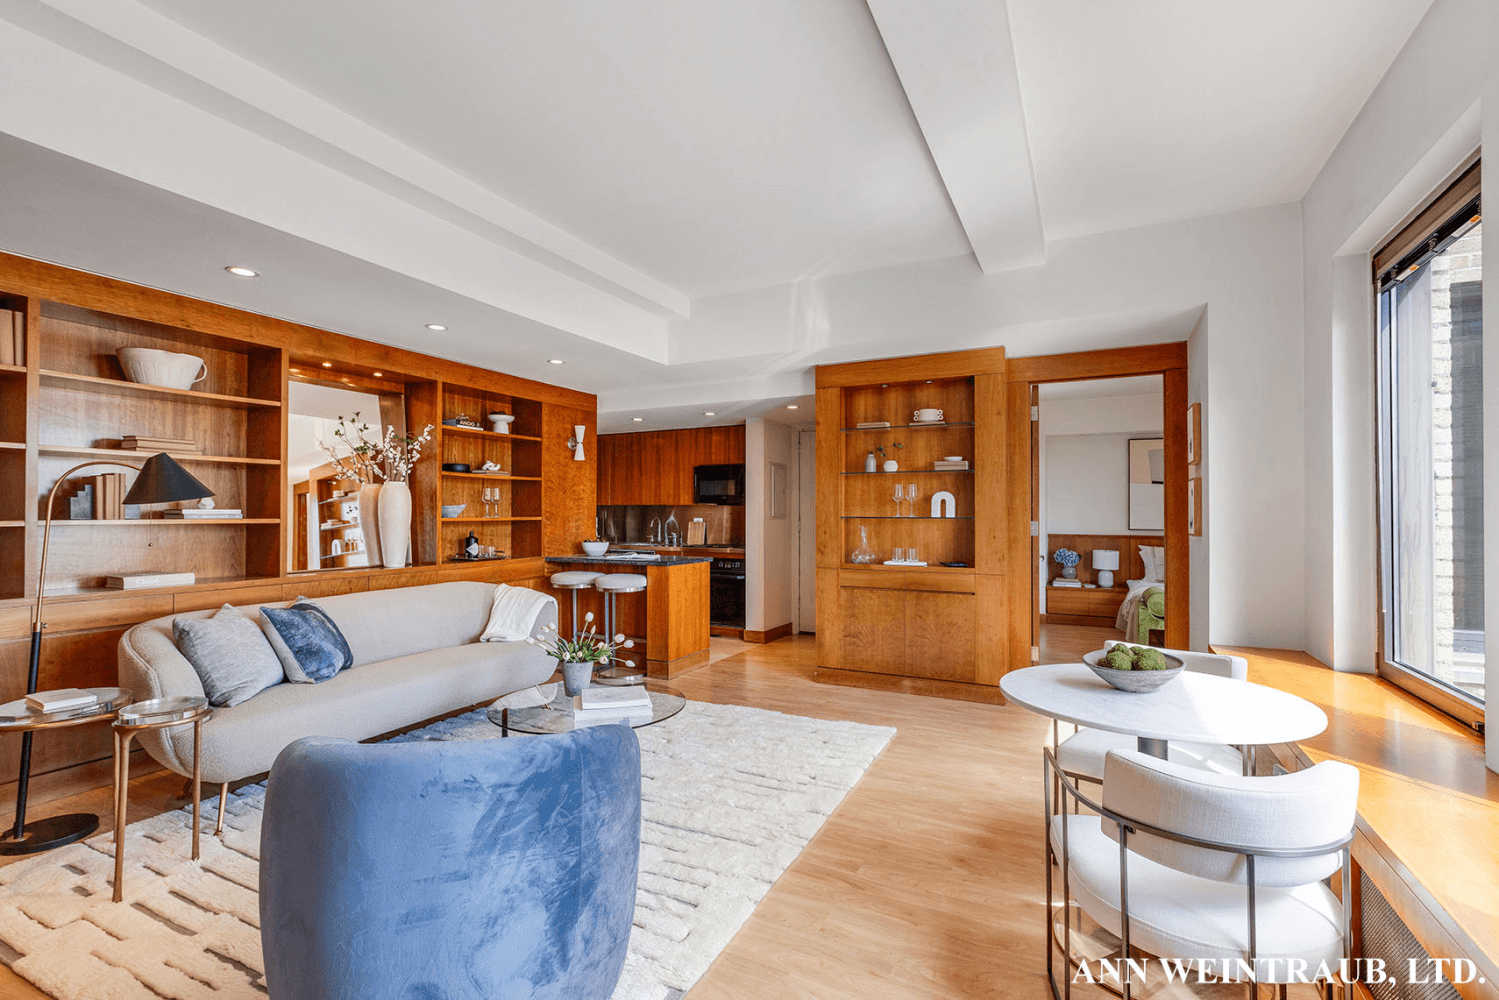 Way up high, in the fabled Tower of One Fifth Avenue, sits a totally renovated two bedroom and two full bathroom apartment.